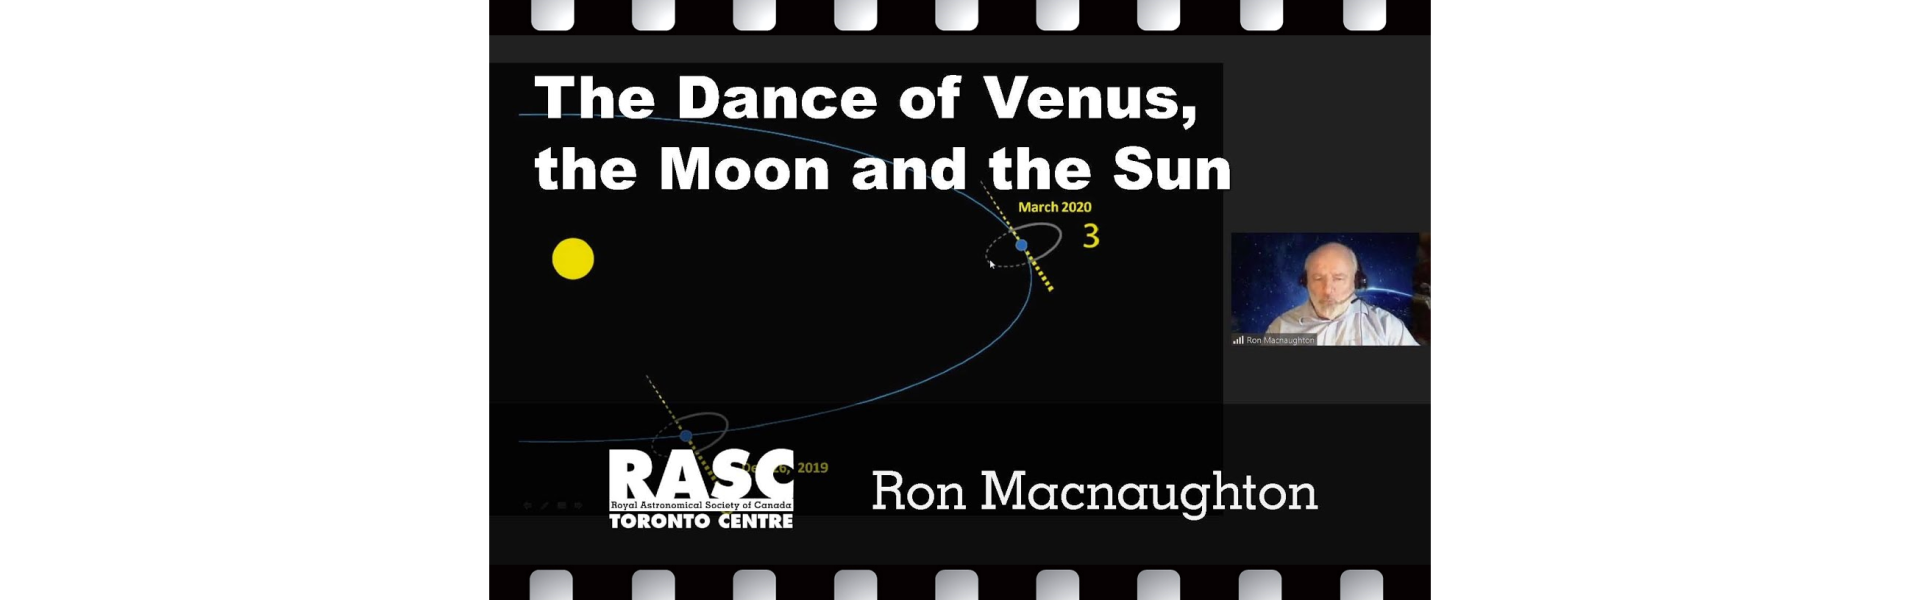 The Dance of Venus, the Moon and the Sun